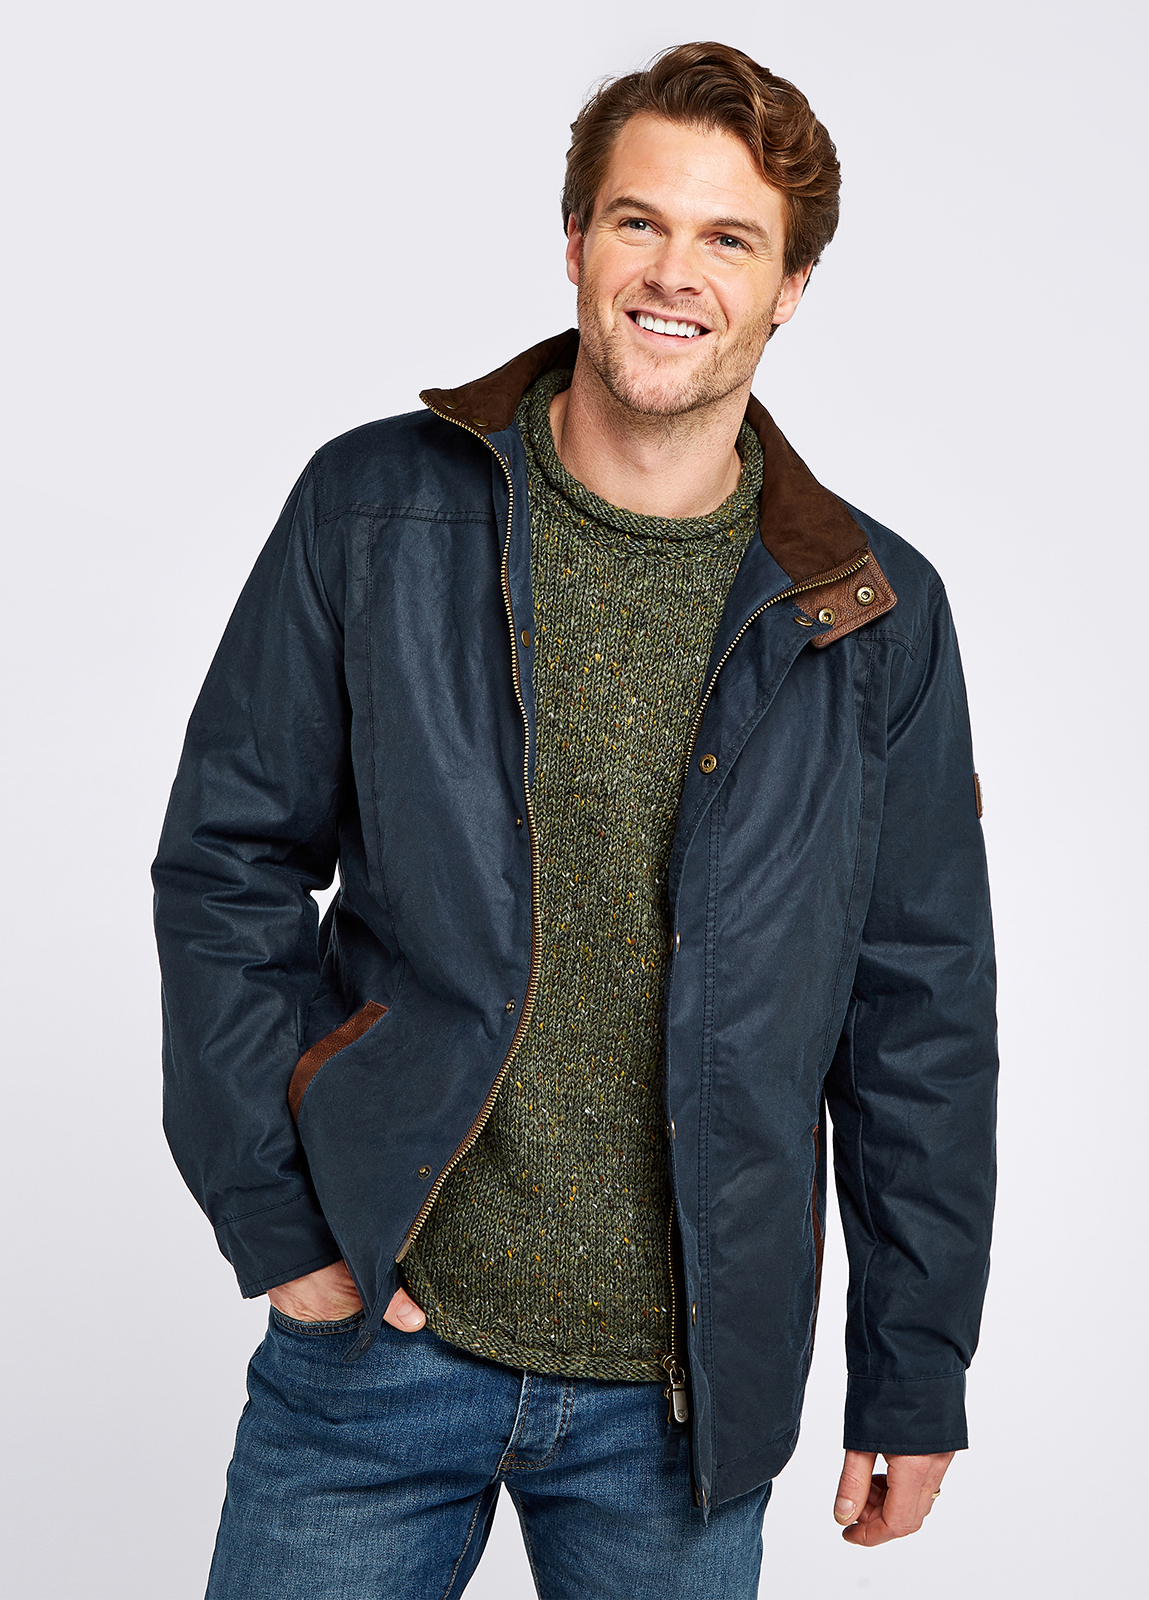 Waist up view of a male model wearing a Dubarry Carrickfergus waxed jacket, ocean blue coloured with a standing collar and buttons along the full zip, the model is wearing the jacket open showing the lighter brown inside collar and he is wearing a green j